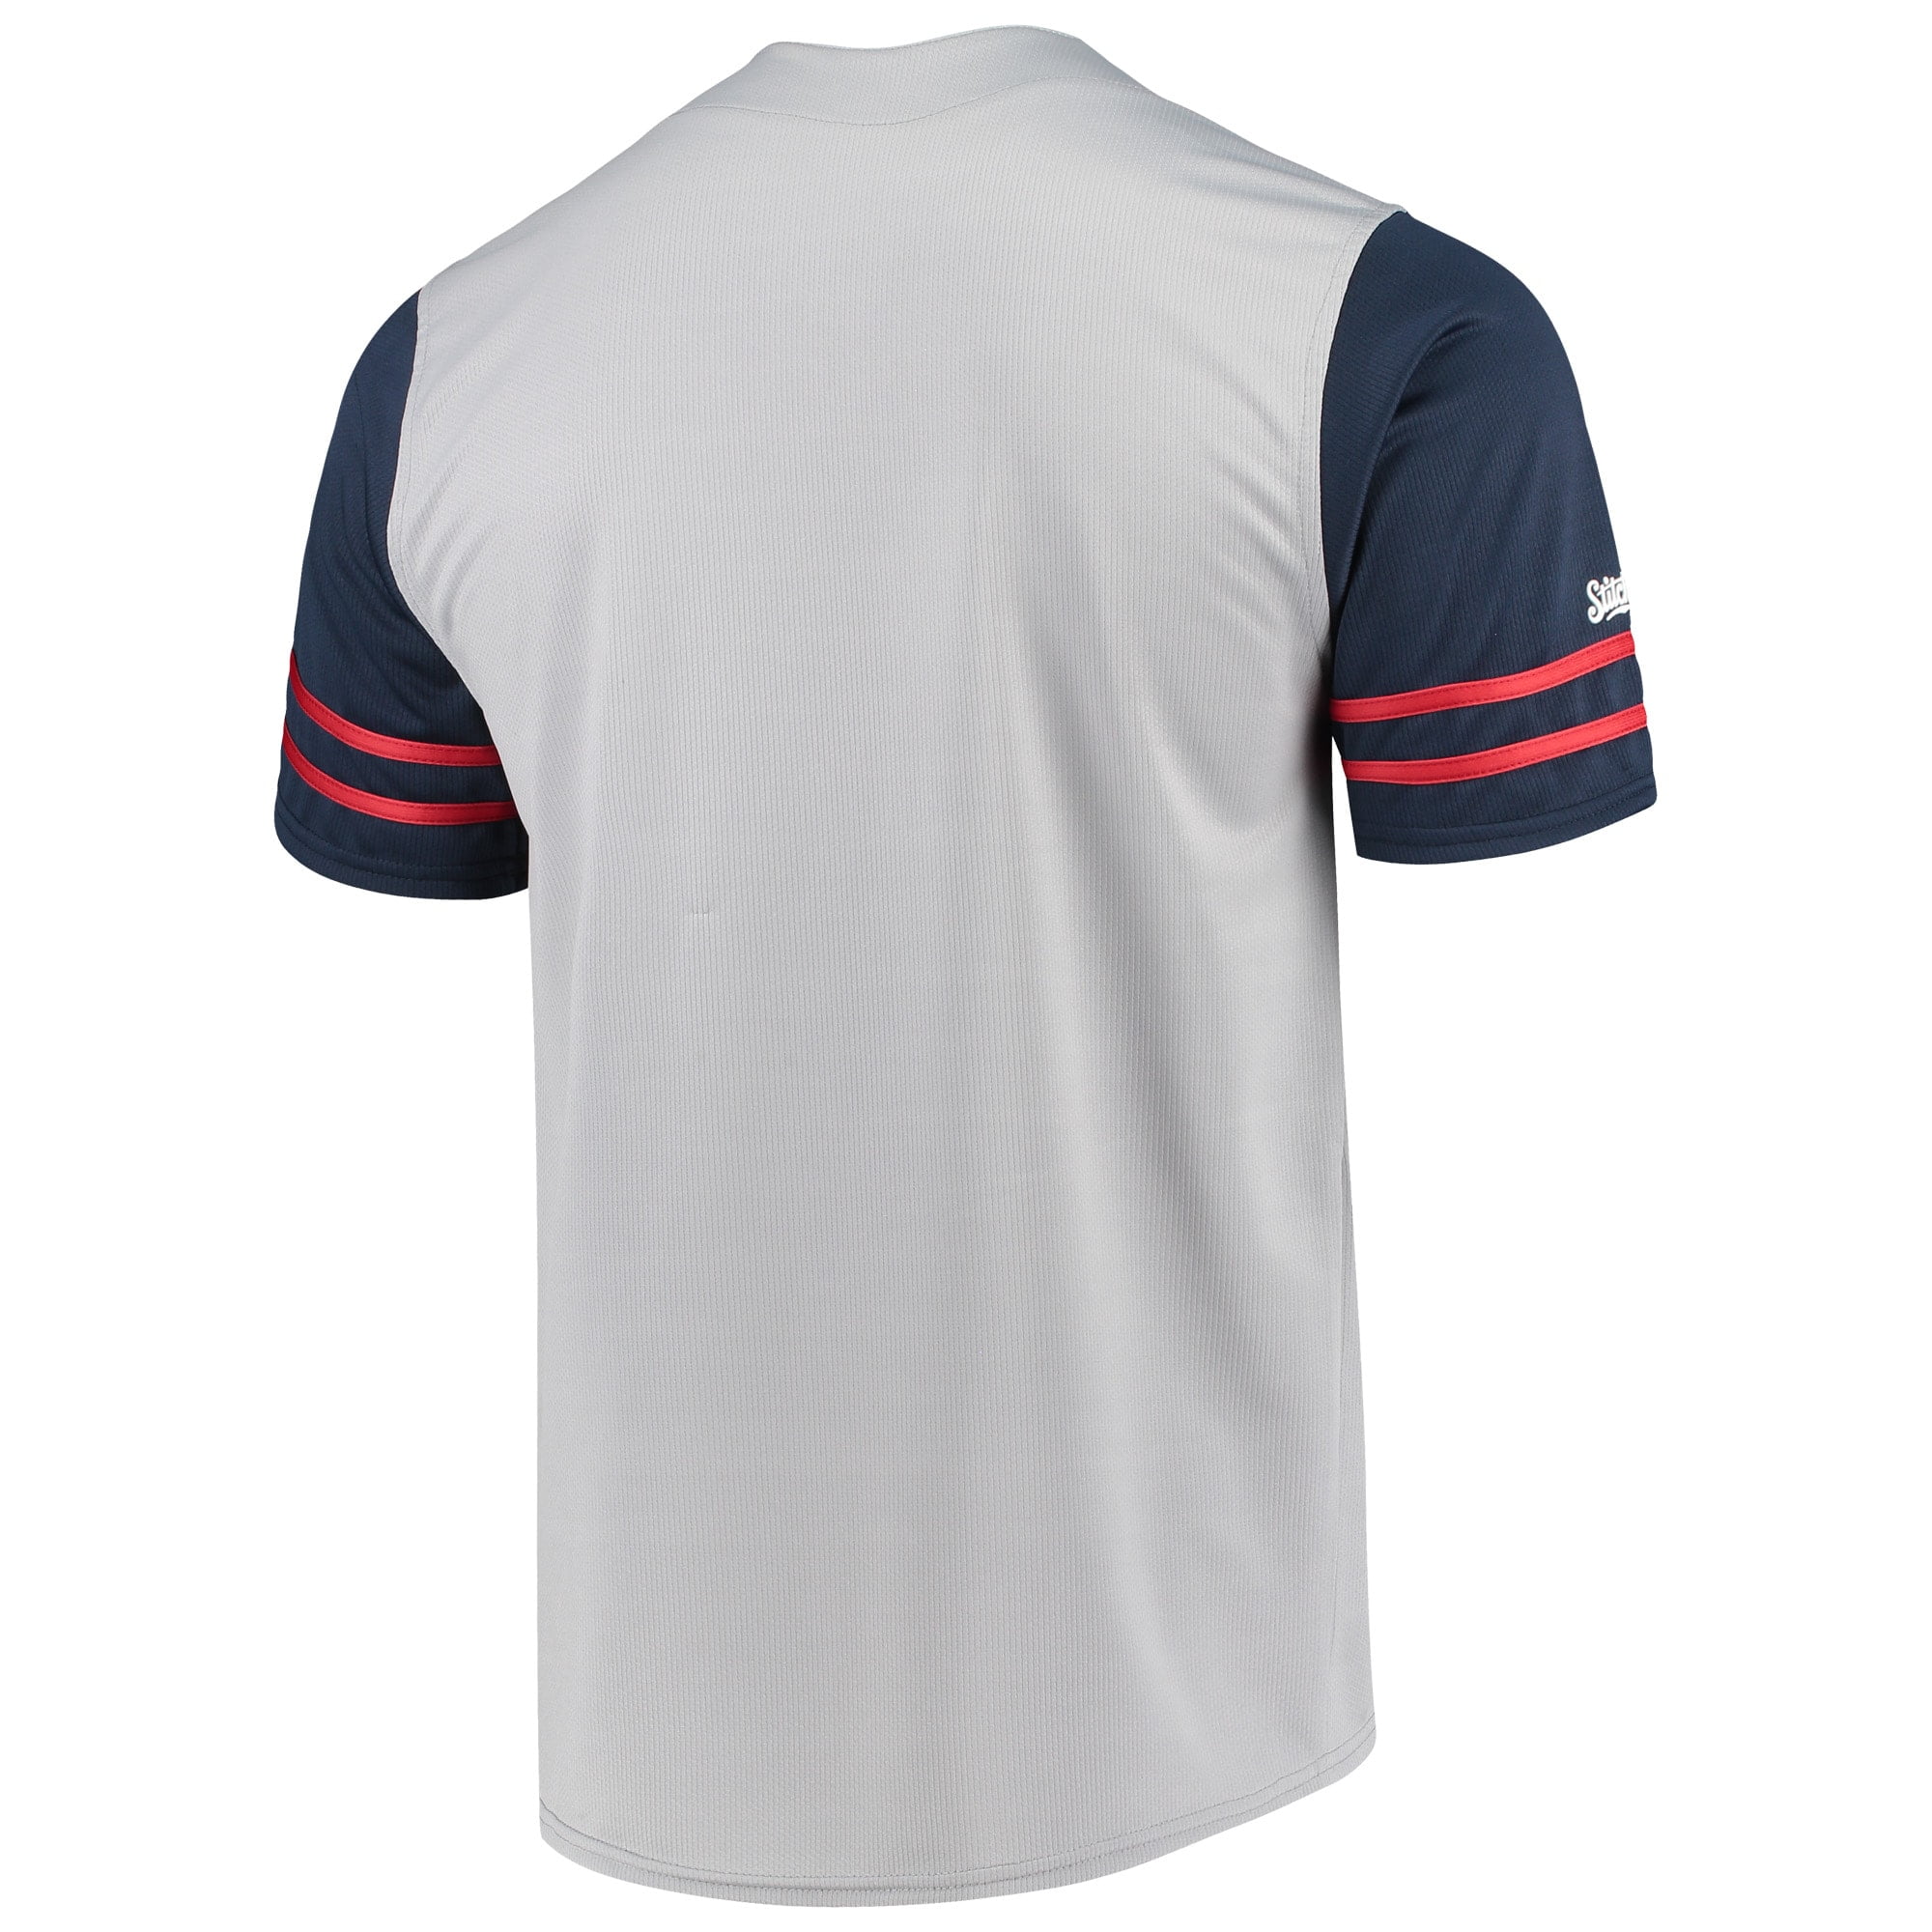 gray indians jersey